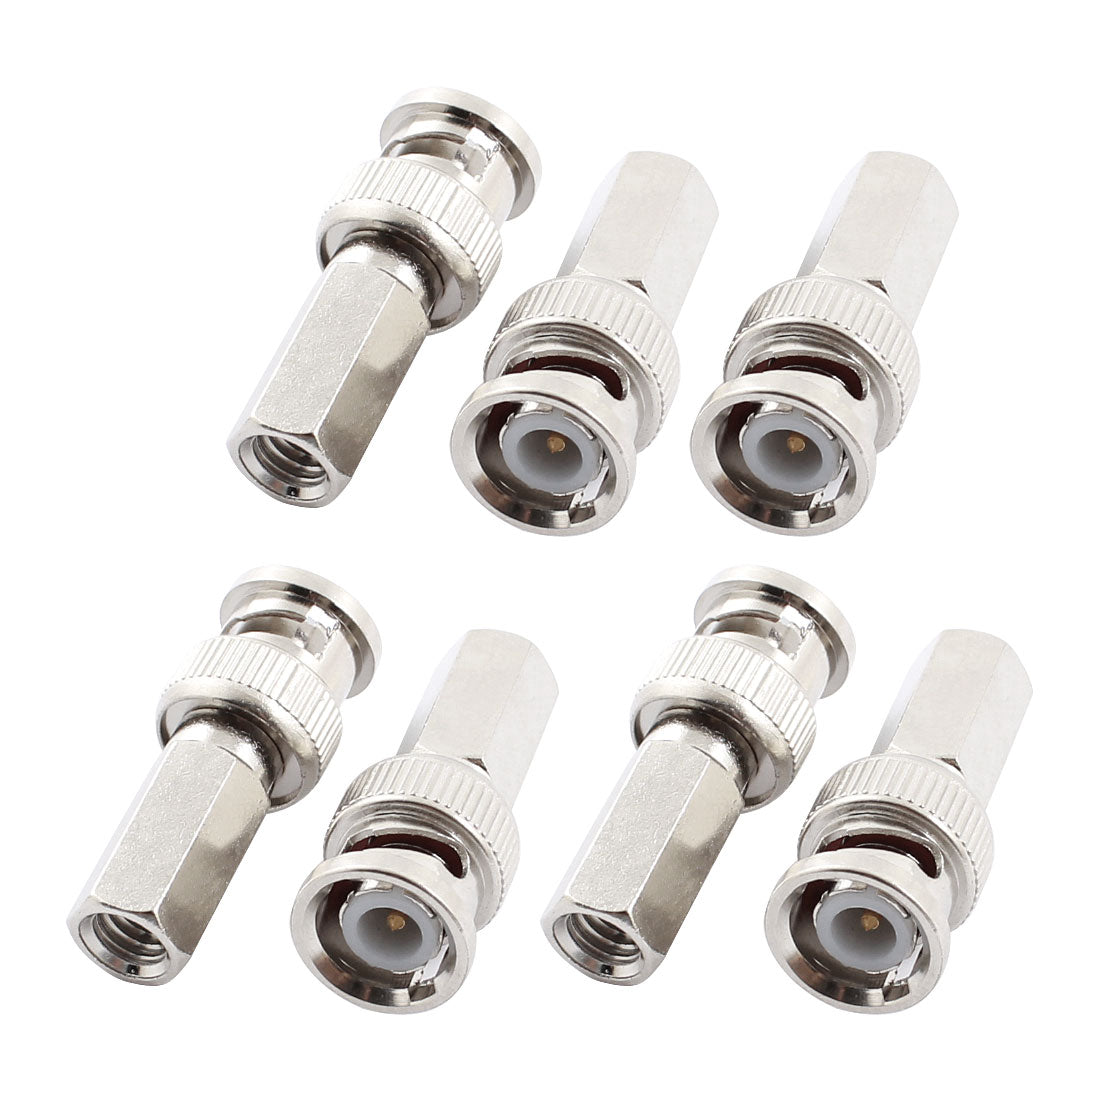 uxcell Uxcell 7pcs RG59 BNC Male Coax Cable Connector Adapter for CCTV Camera